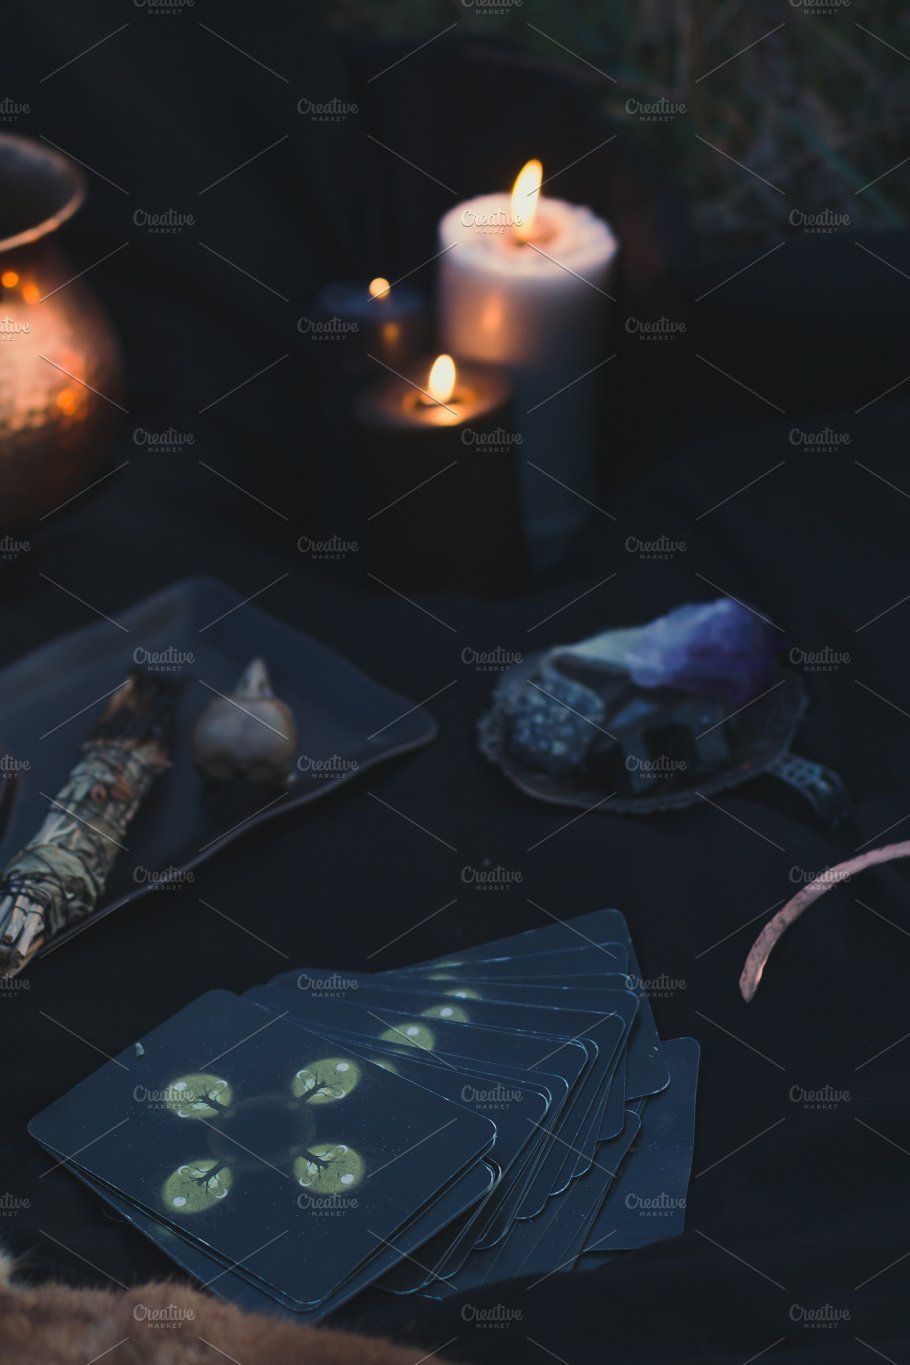 Close up using taro cards for ritual concept photo. Dark witchcore aesthetic. Front view photography with blurred background. High quality picture for wallpaper, travel blog, magazine, article Nature